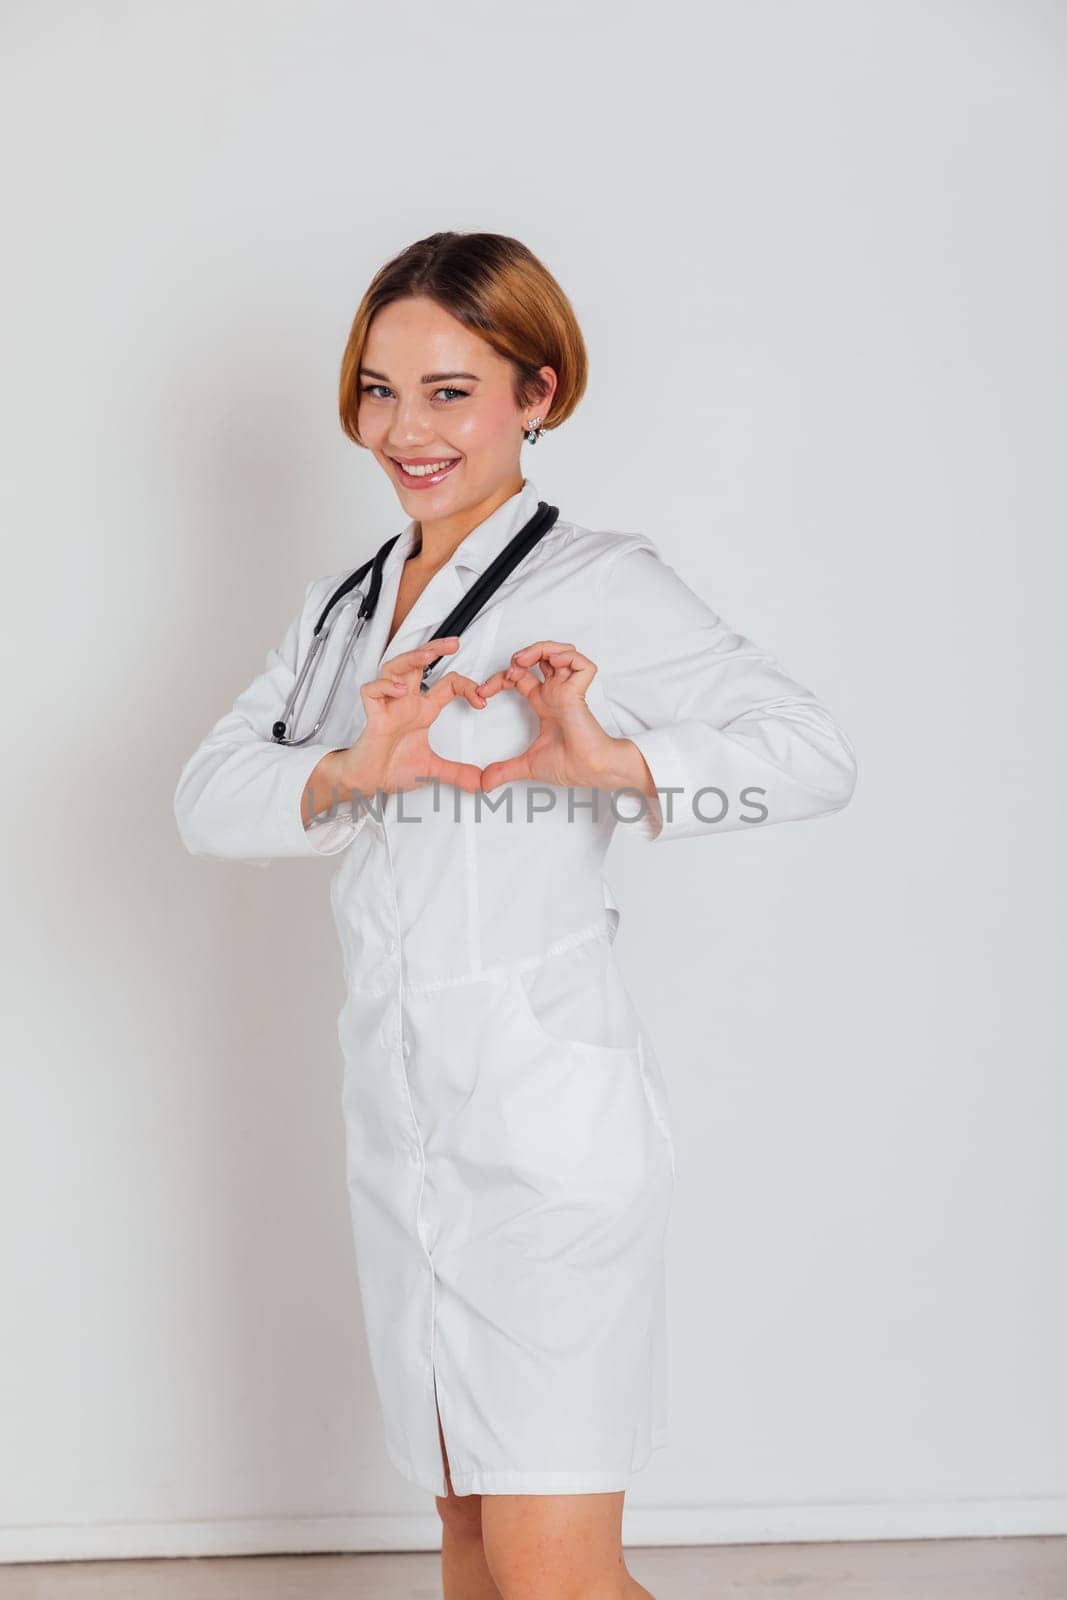 a woman doctor in white coat with phonendoscope shows heart